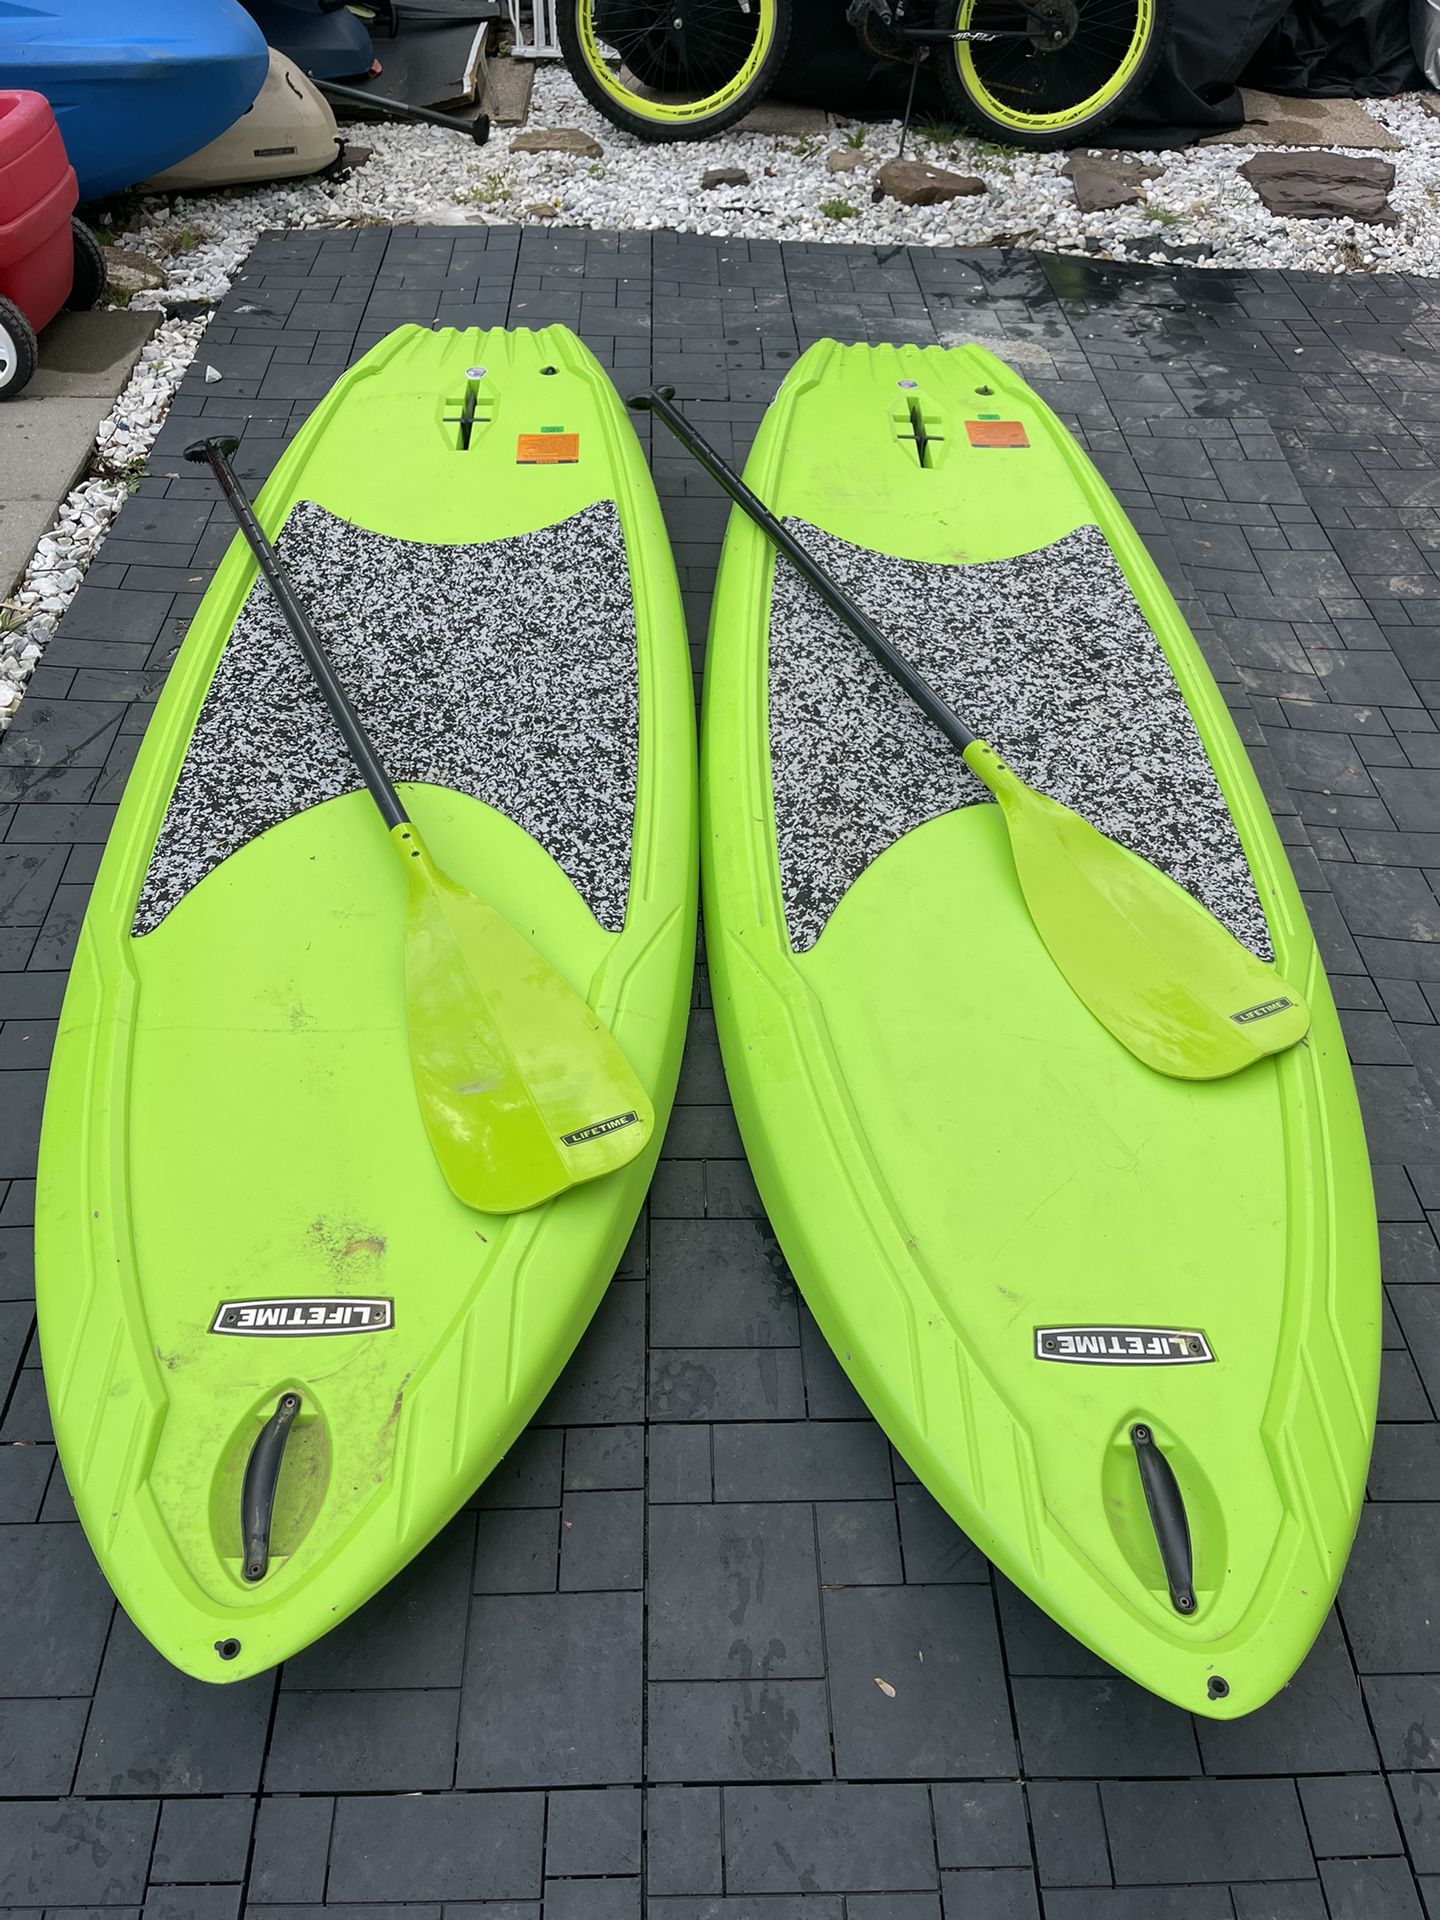 Pair of lifetime paddle board 8 ft with matching paddle ( like new )